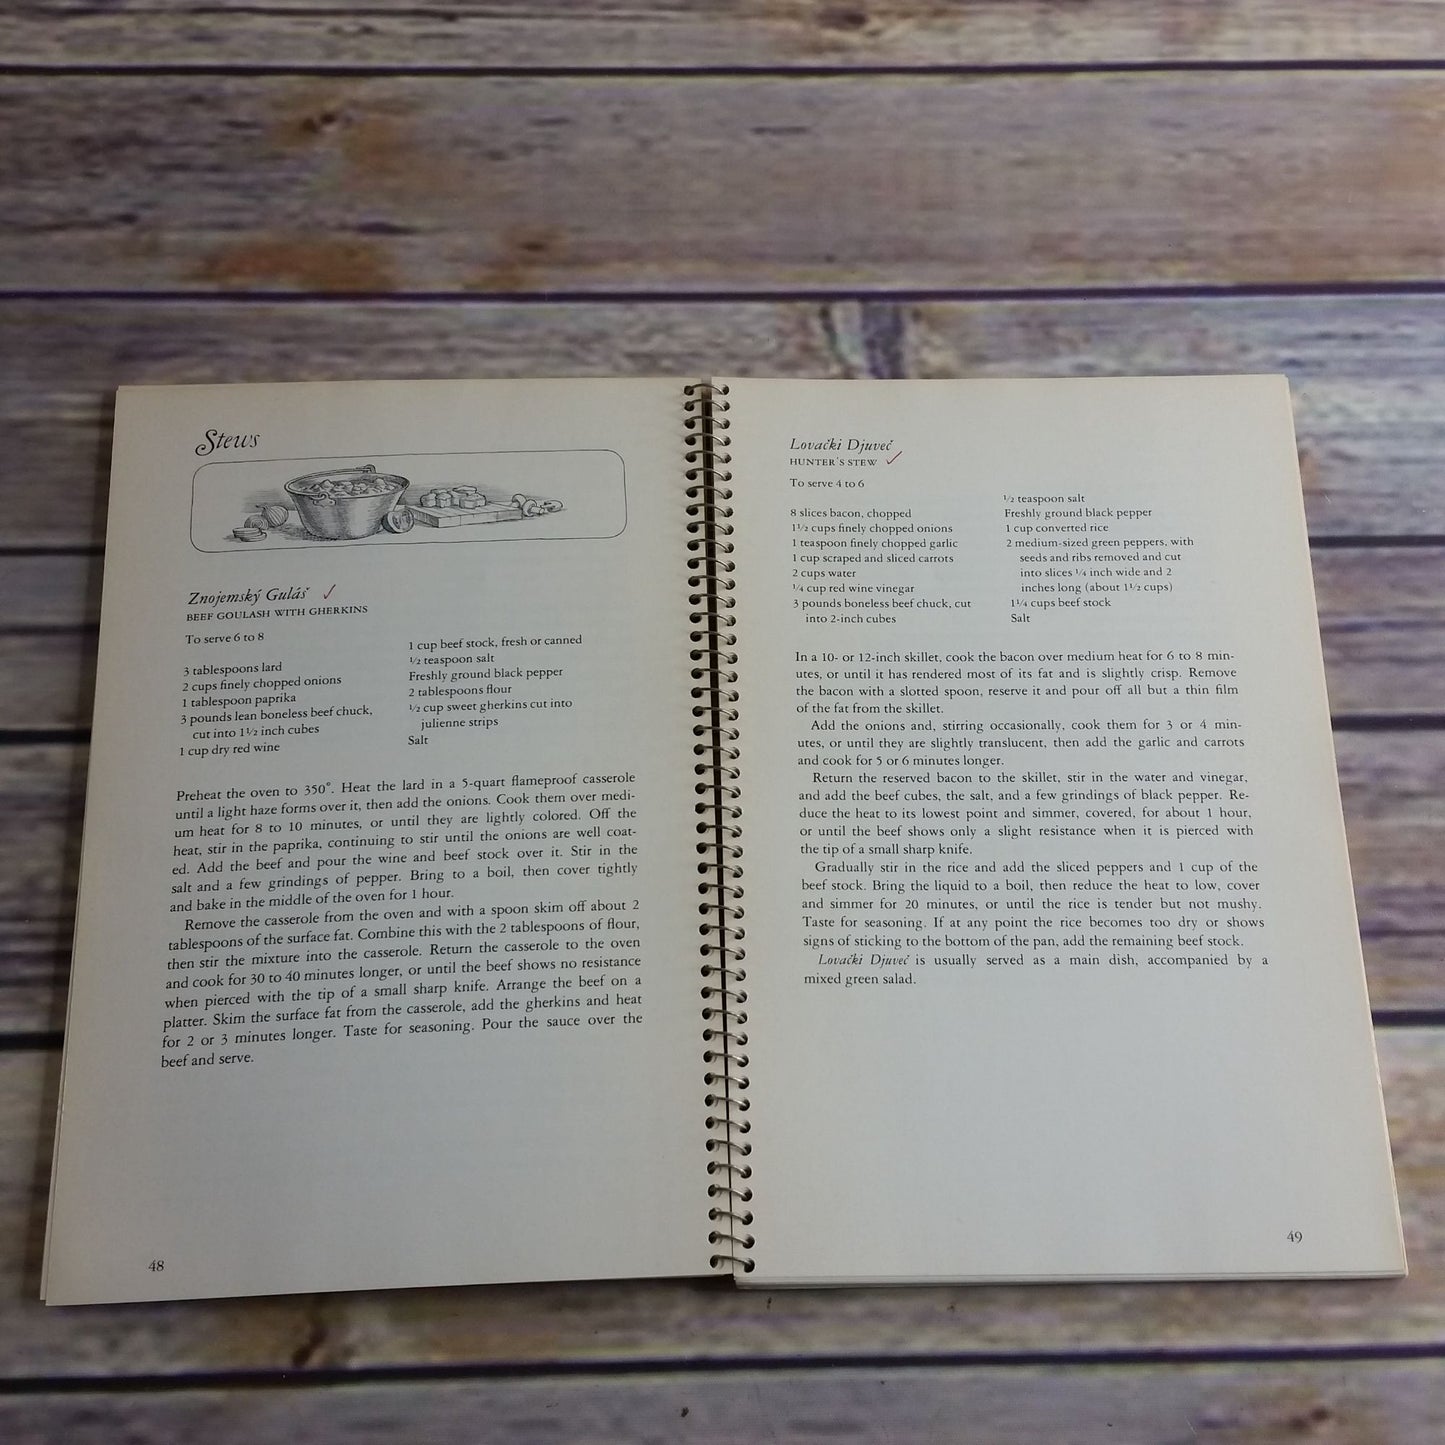 Vtg Austrian Cookbook The Cooking of Viennas Empire Time Life Books Foods of the World 1968 Spiral Bound Austria